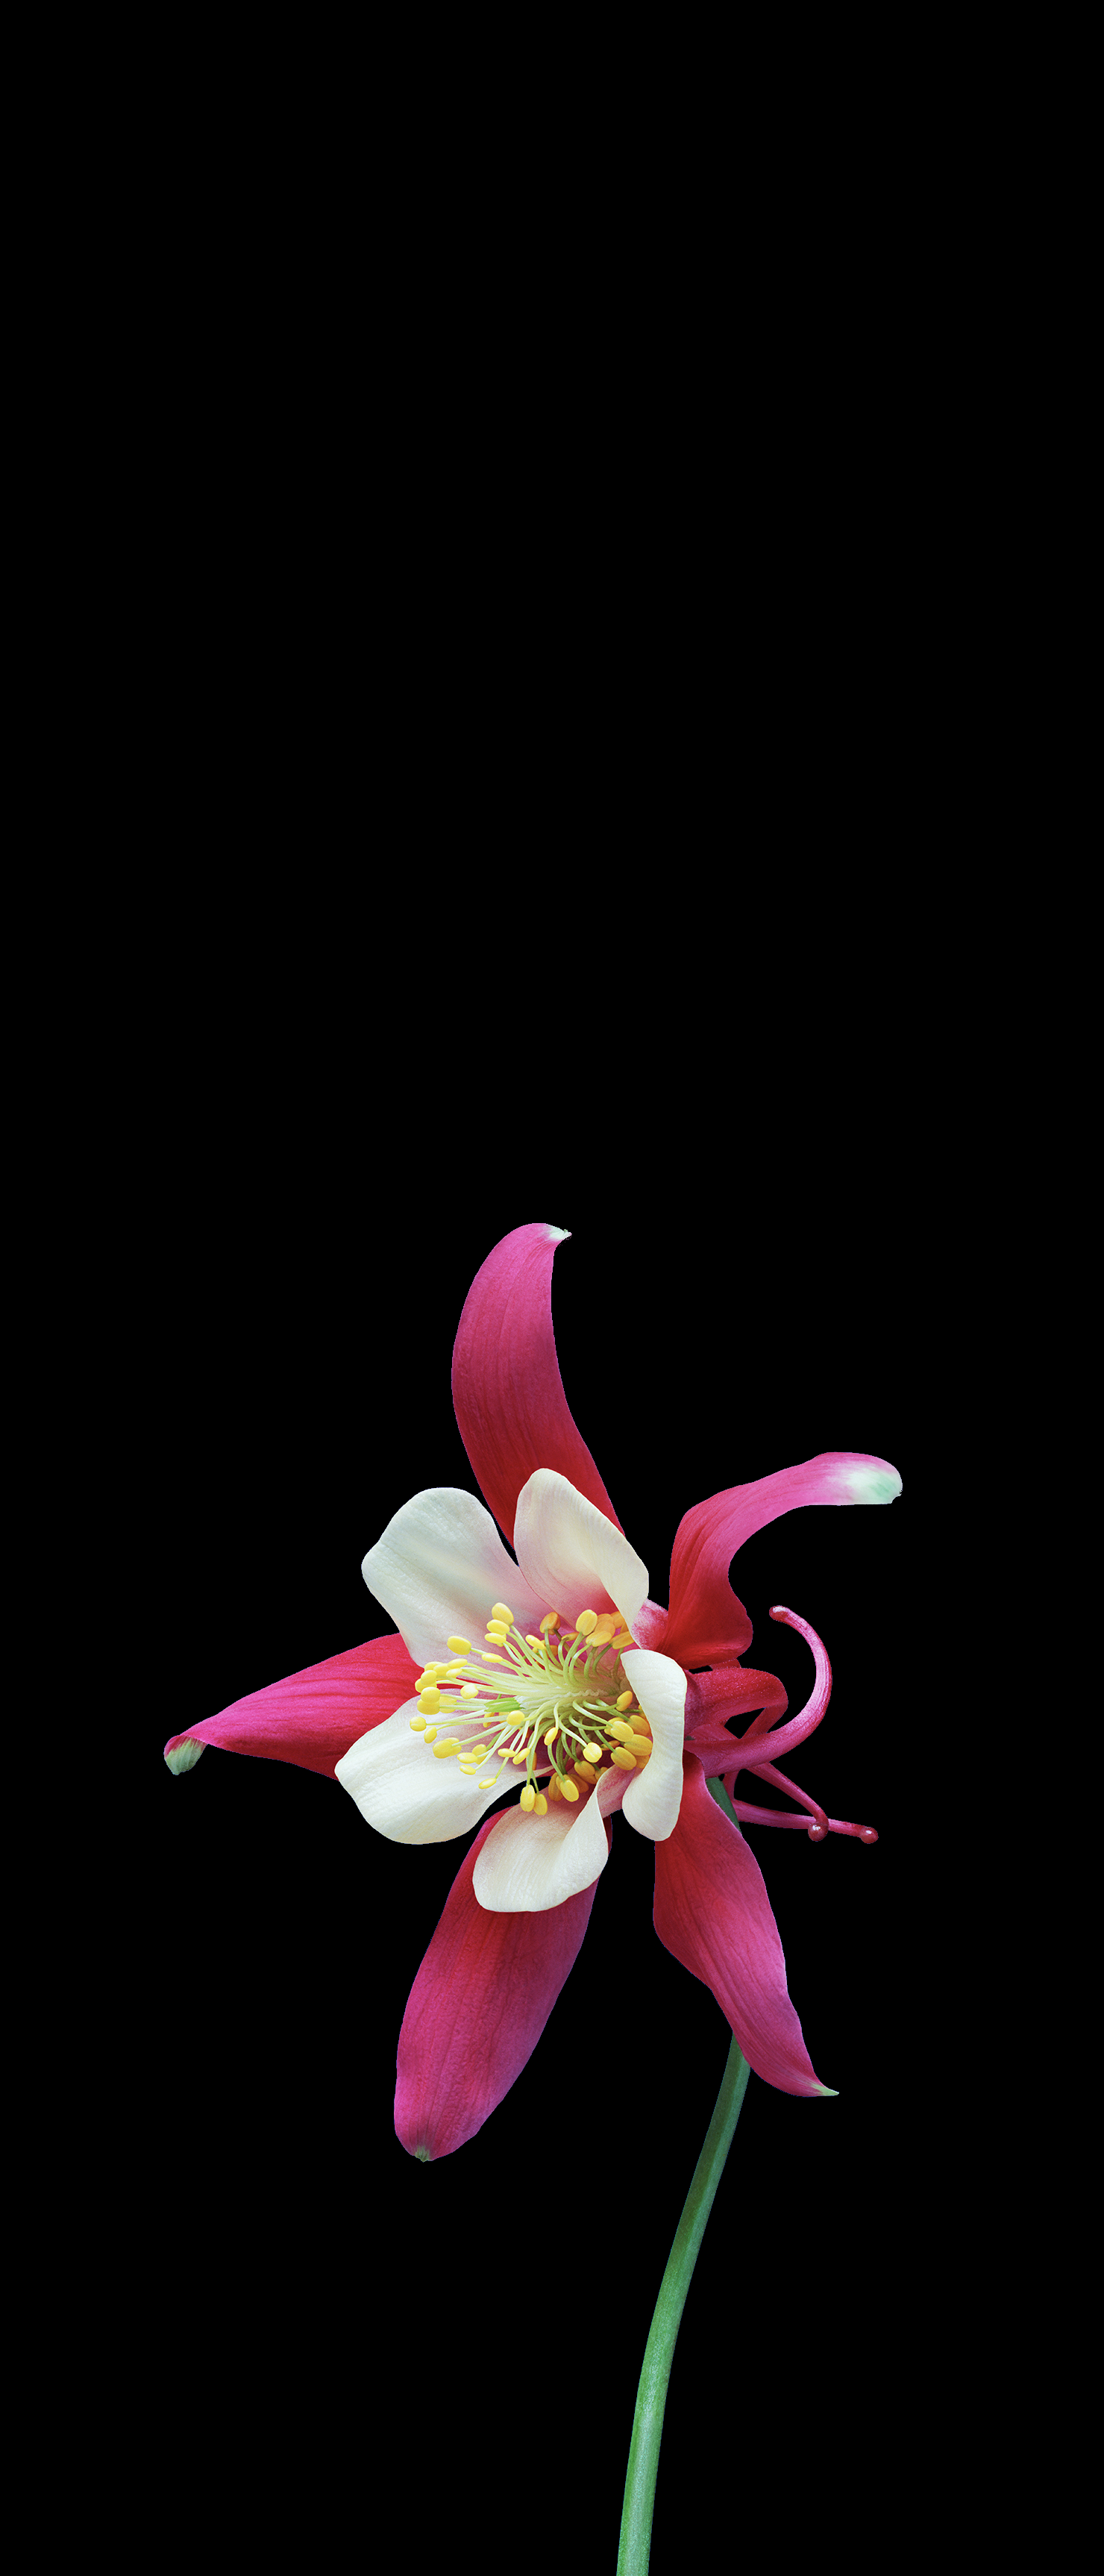 A collection of flower wallpaper from ios ; all > [1080x2520] (21:9)